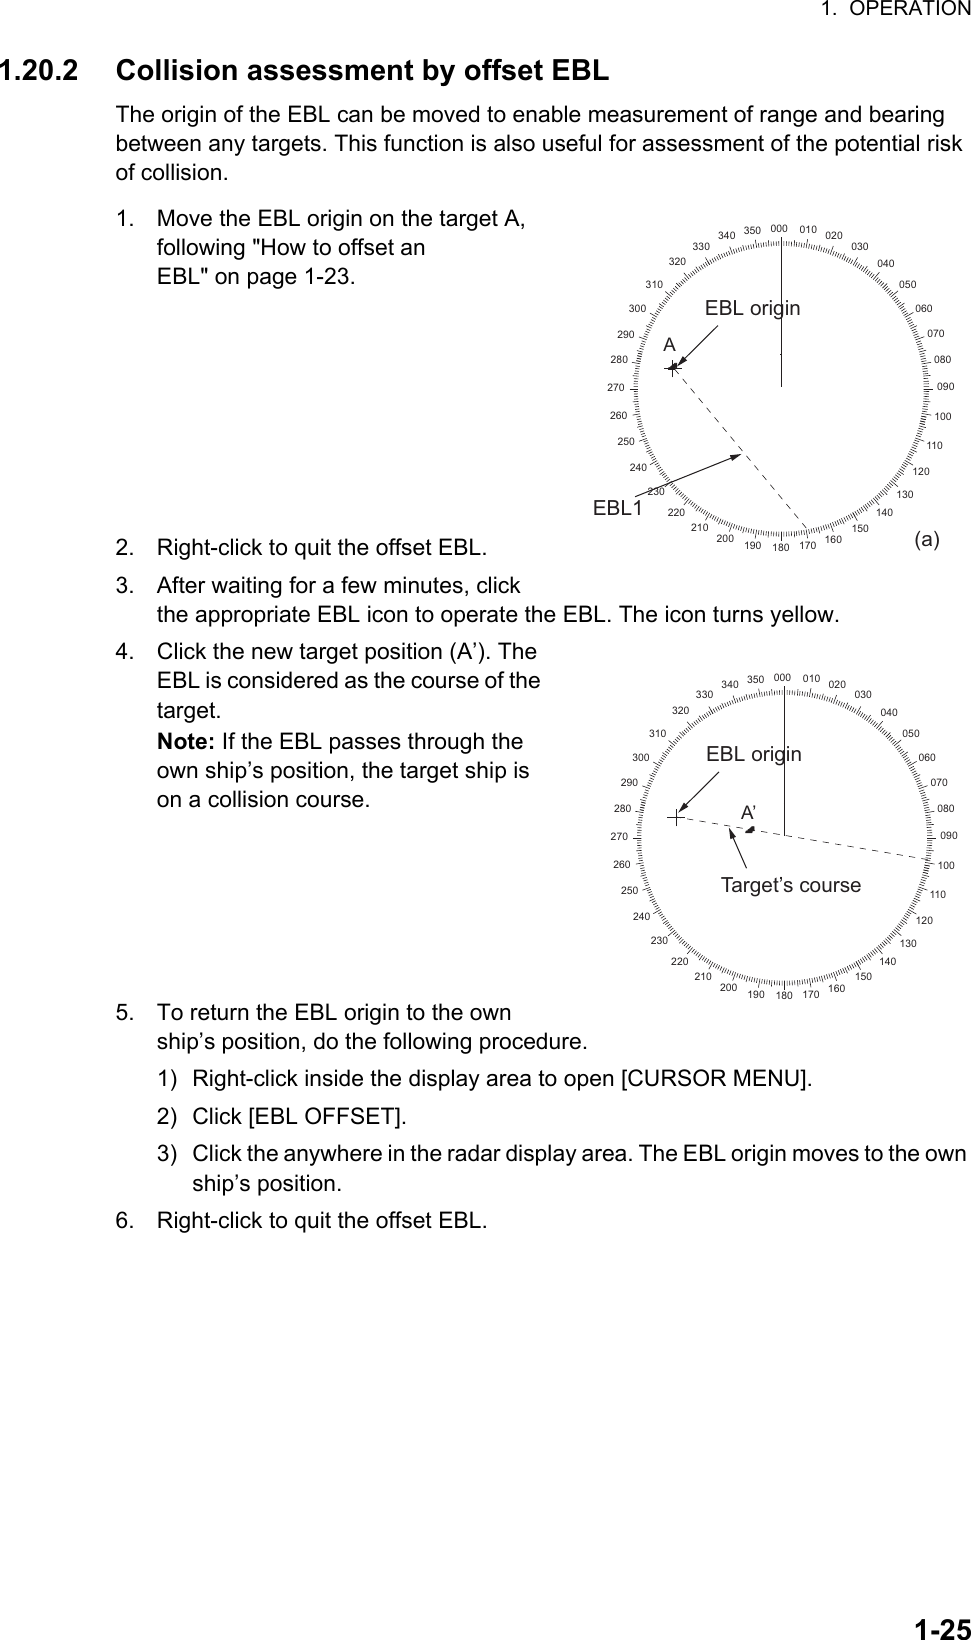 1.  OPERATION1-251.20.2 Collision assessment by offset EBLThe origin of the EBL can be moved to enable measurement of range and bearing    between any targets. This function is also useful for assessment of the potential risk of collision.1. Move the EBL origin on the target A, following &quot;How to offset an EBL&quot; on page 1-23.2. Right-click to quit the offset EBL.3. After waiting for a few minutes, click the appropriate EBL icon to operate the EBL. The icon turns yellow.4. Click the new target position (A’). The EBL is considered as the course of the target.Note: If the EBL passes through the own ship’s position, the target ship is on a collision course. 5. To return the EBL origin to the own ship’s position, do the following procedure.1) Right-click inside the display area to open [CURSOR MENU].2) Click [EBL OFFSET].3) Click the anywhere in the radar display area. The EBL origin moves to the own ship’s position.6. Right-click to quit the offset EBL.000 010 020030040050060070080090100110120130140150160170180190200210220230240250260270280290300310320330 340 350AEBL1(a)EBL origin000 010 020030040050060070080090100110120130140150160170180190200210220230240250260270280290300310320330 340 350A’Target’s courseEBL origin